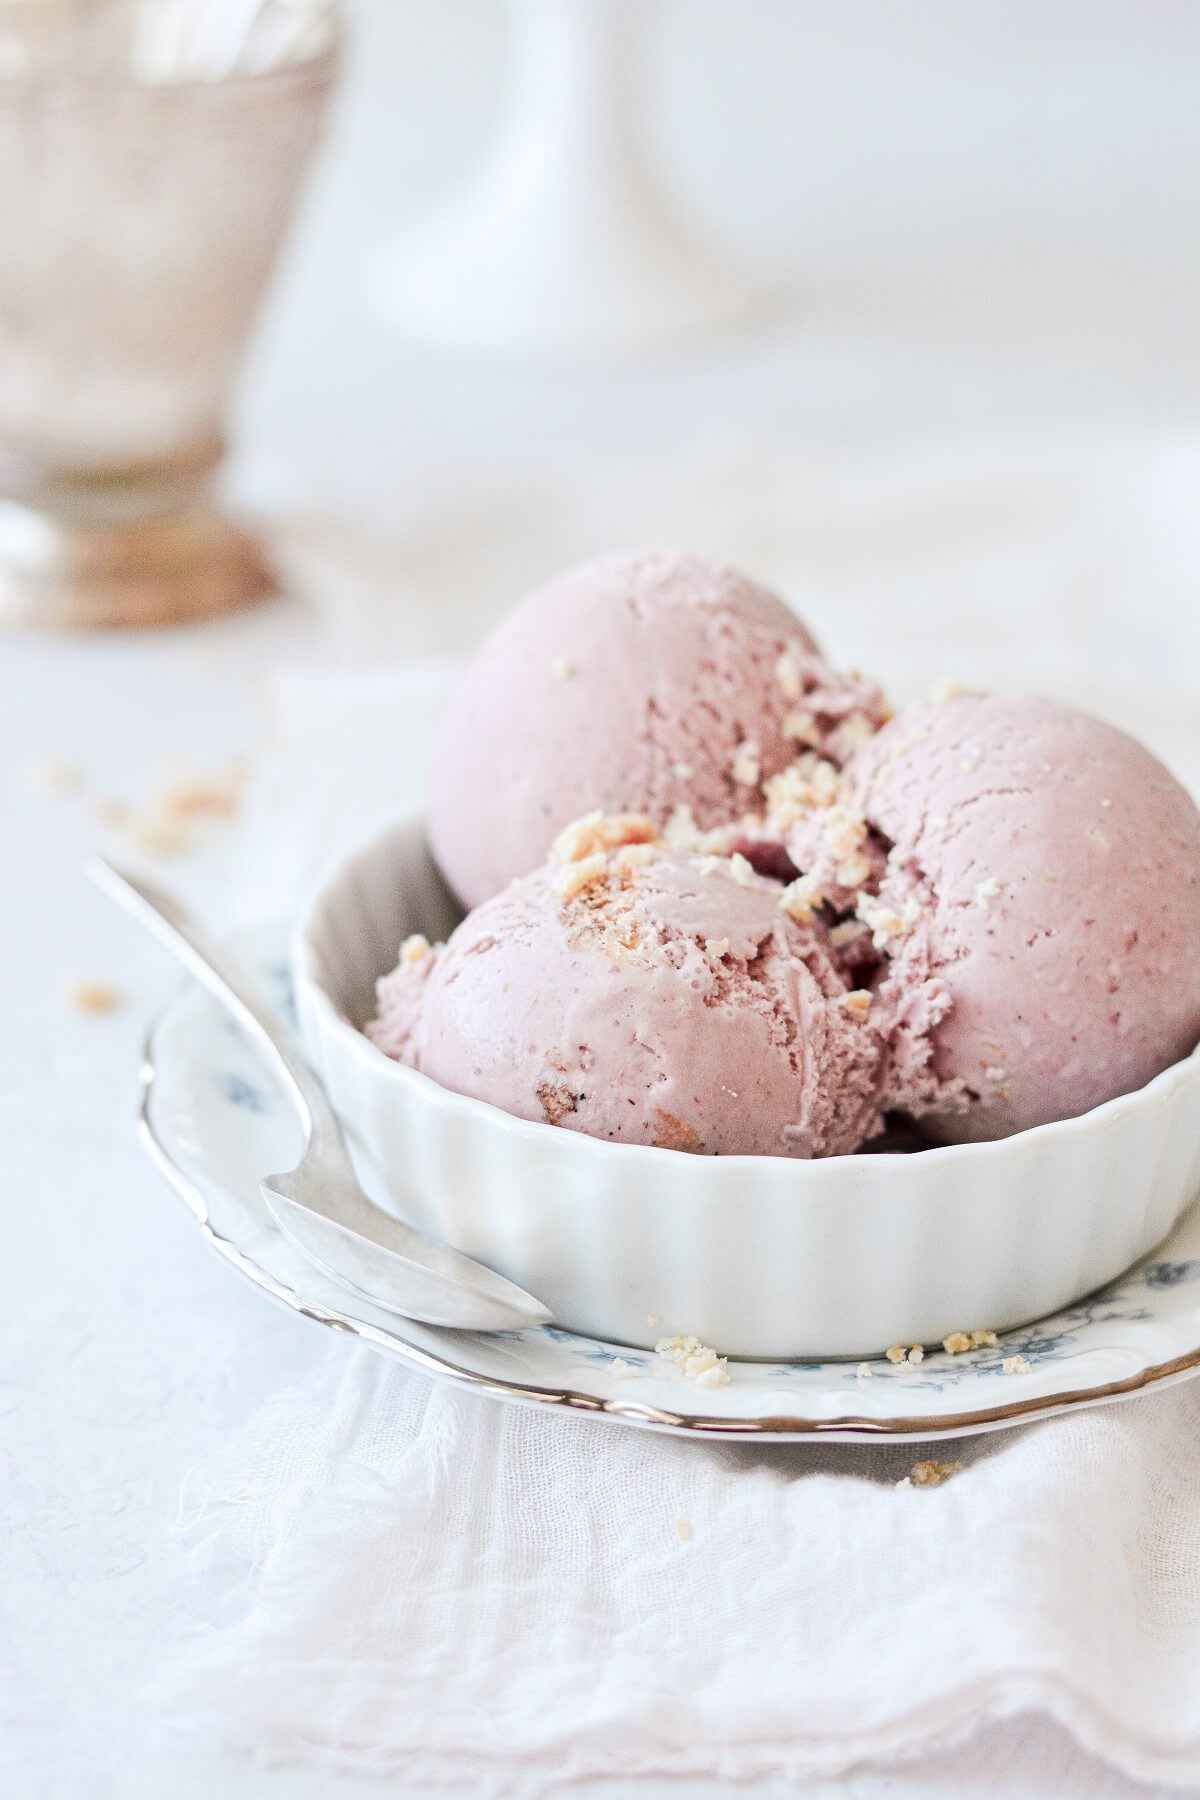 Three scoops of blackberry pie ice cream sprinkled with crumbled pie crust.